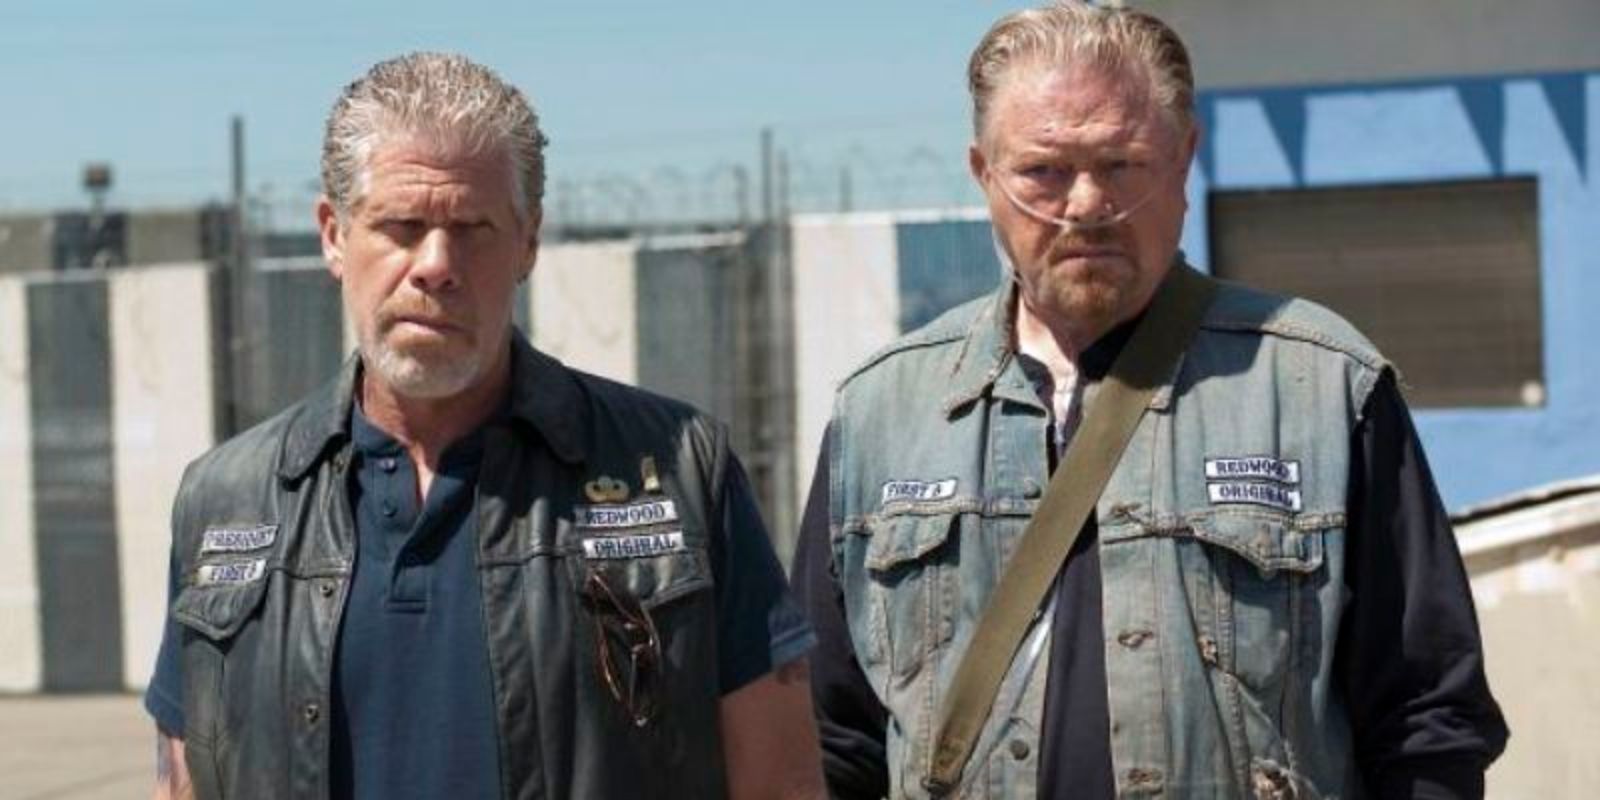 Sons Of Anarchy 5 Times We Felt Bad For Clay (& 5 Times We Hated Him)